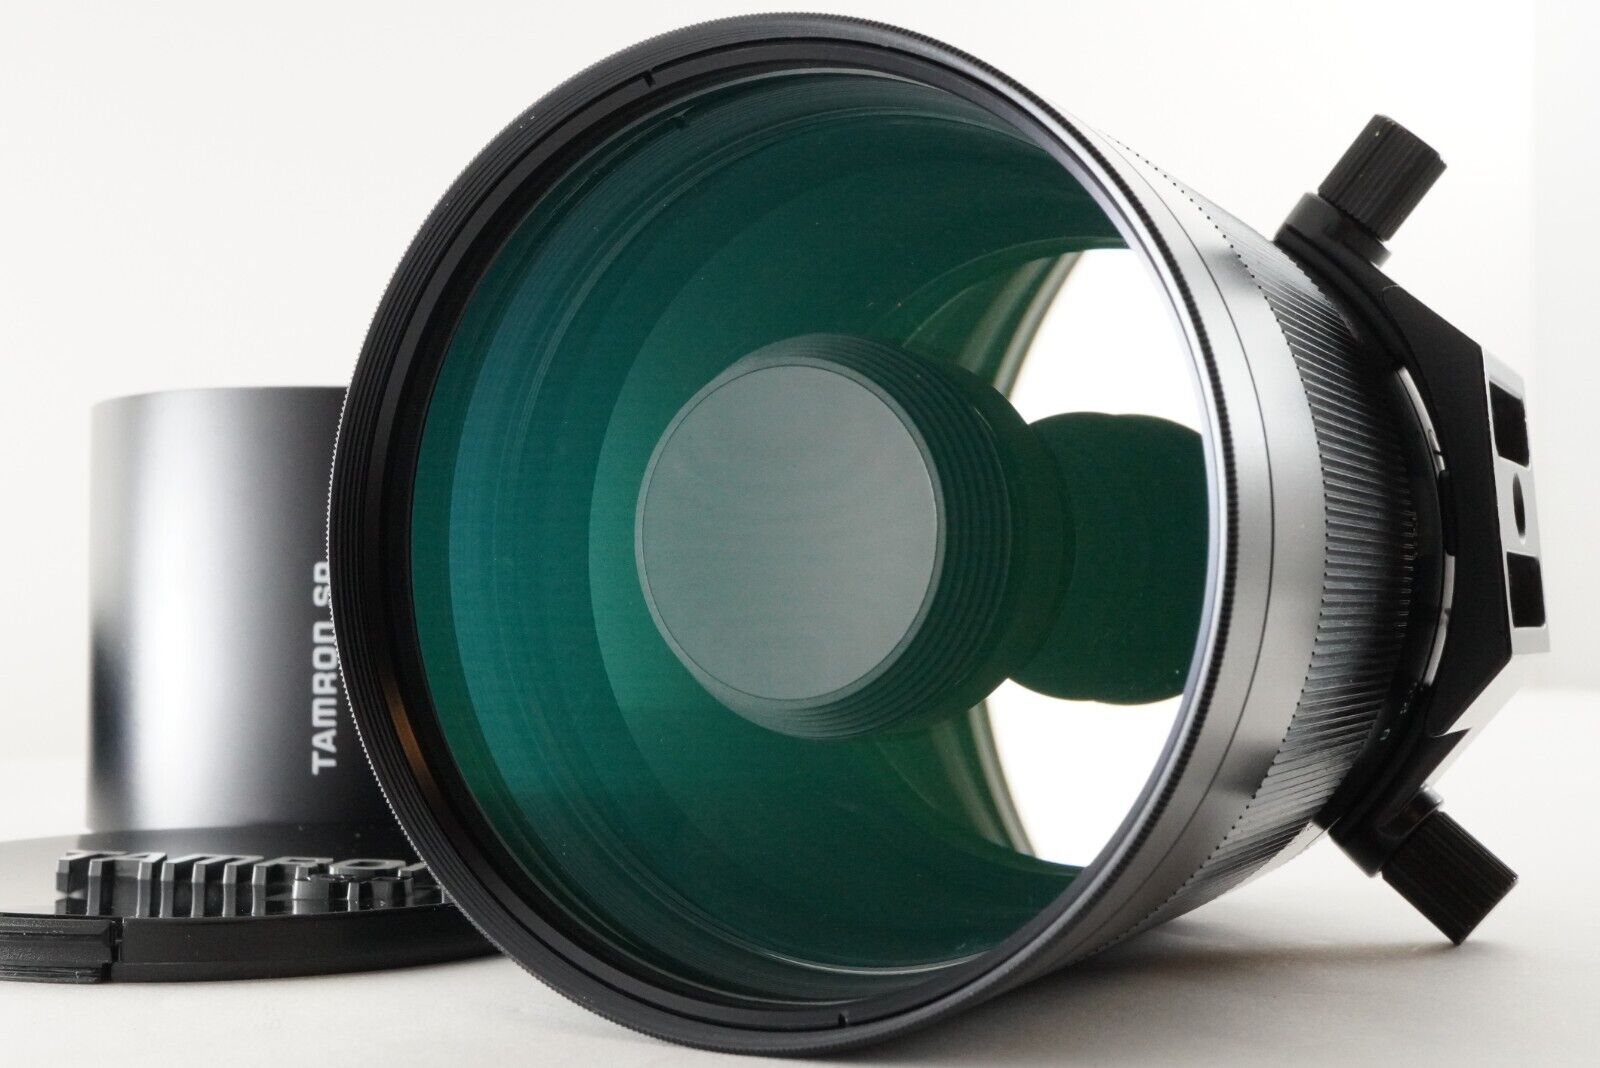 TAMRON SP 500mm F8 TELE MACRO For CANON FD MF Telephoto Lens from 